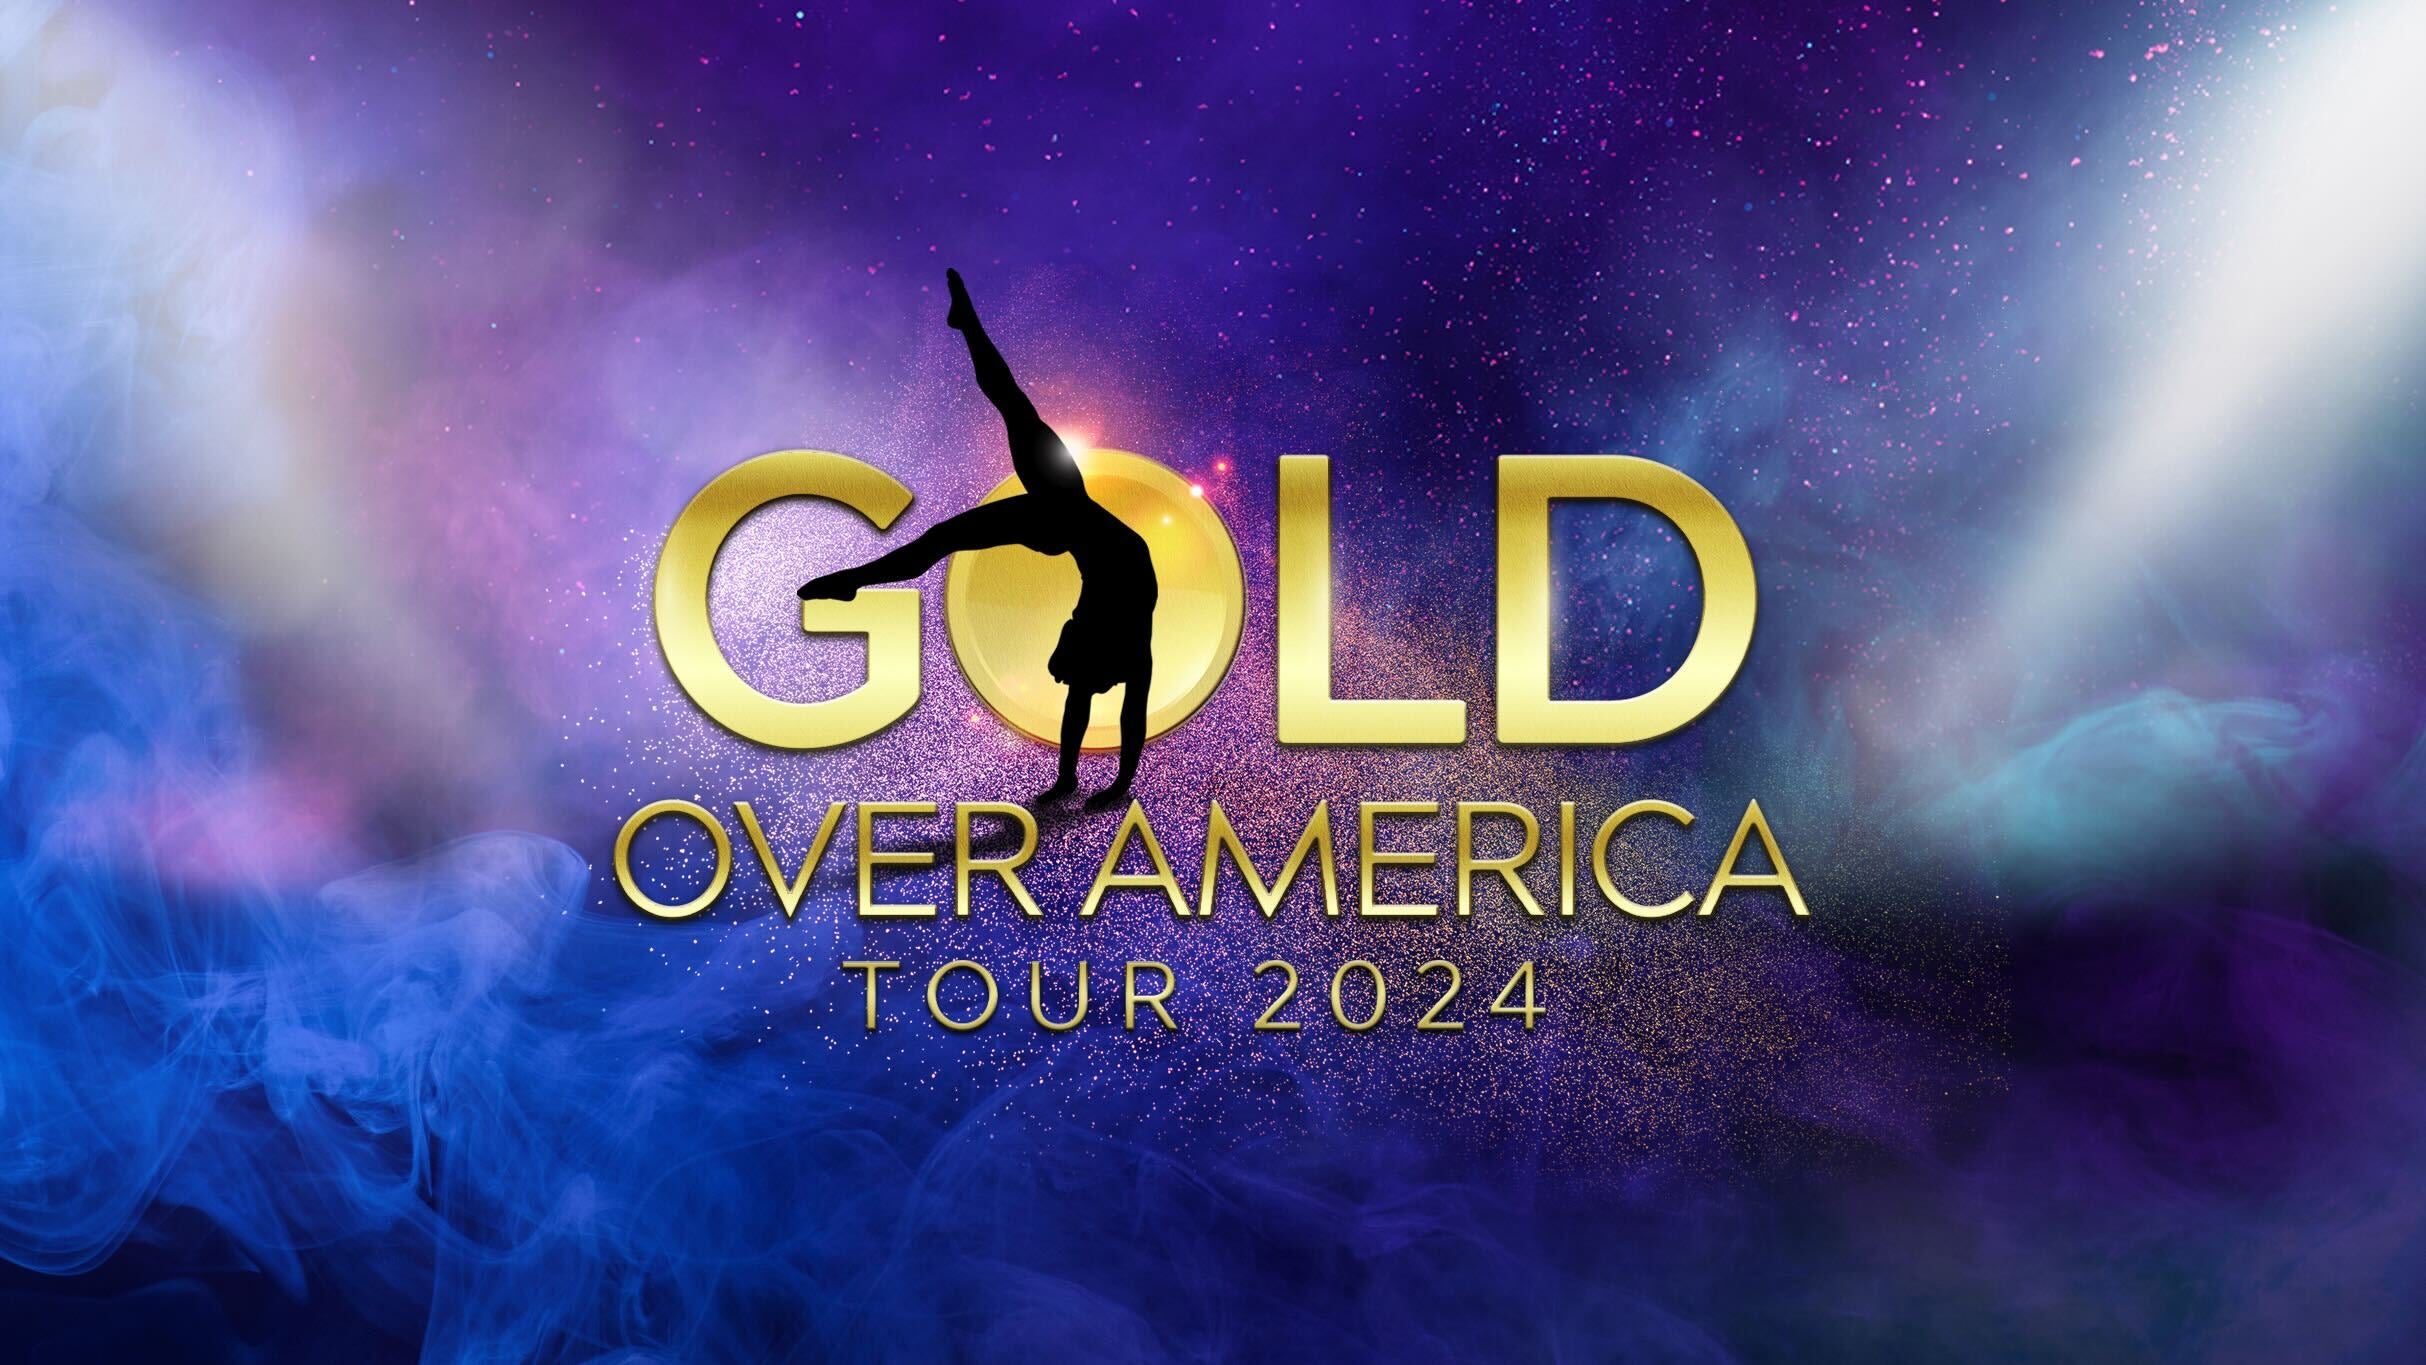 updated presale password for Gold Over America Starring Simone Biles affordable tickets in Detroit at Little Caesars Arena